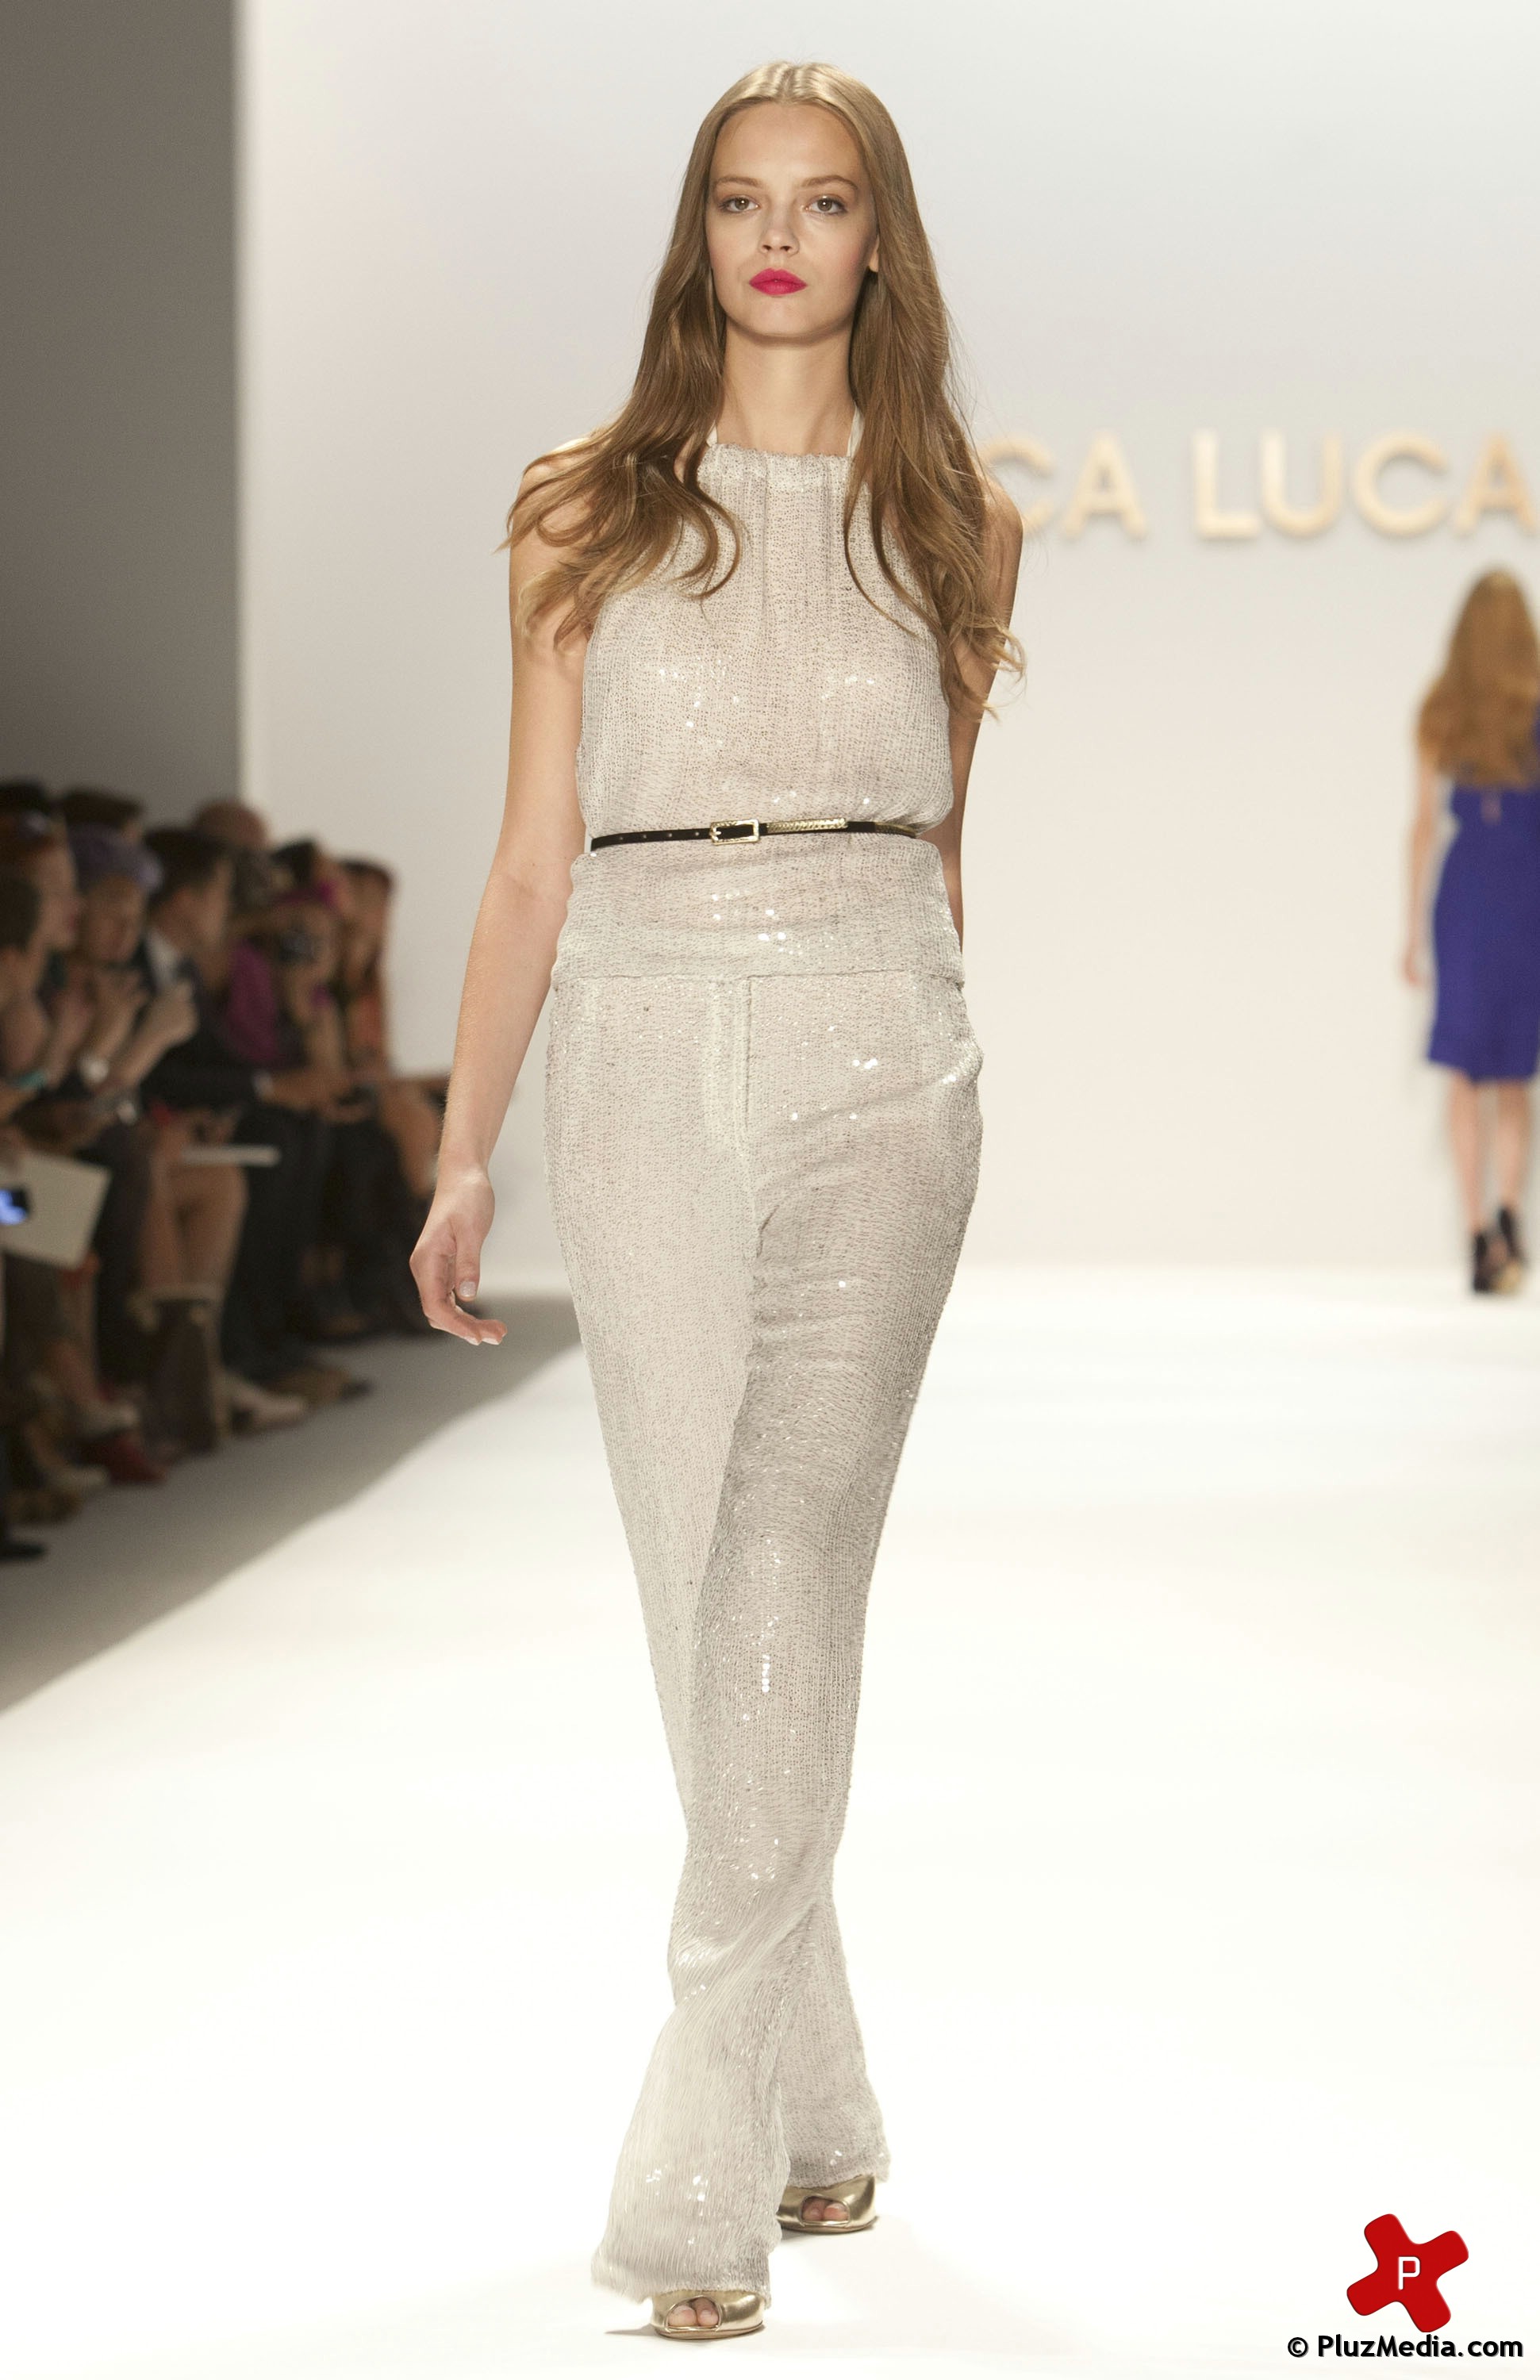 Mercedes Benz New York Fashion Week Spring 2012 - Luca Luca | Picture 74331